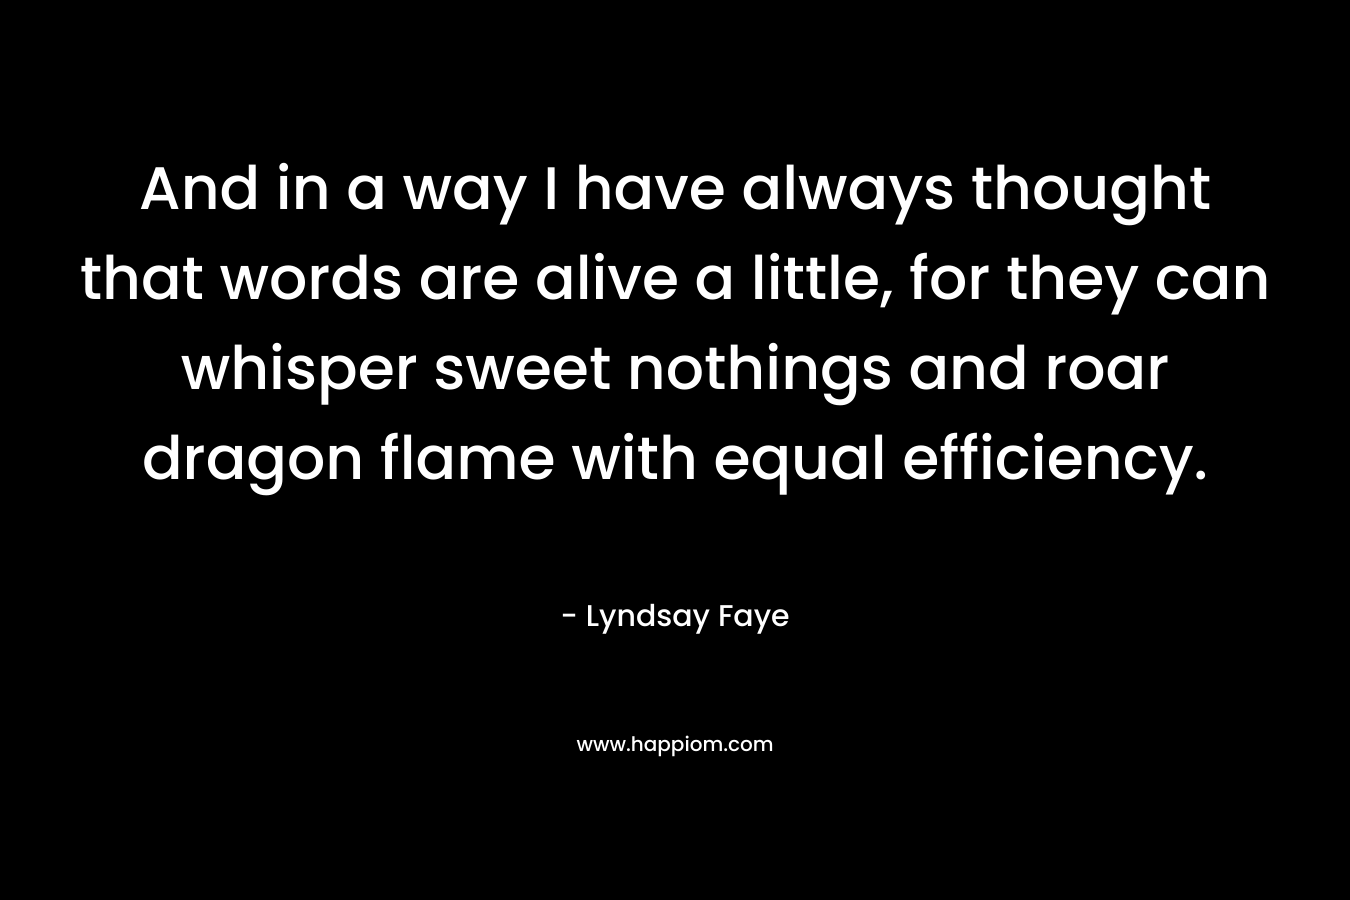 And in a way I have always thought that words are alive a little, for they can whisper sweet nothings and roar dragon flame with equal efficiency. – Lyndsay Faye